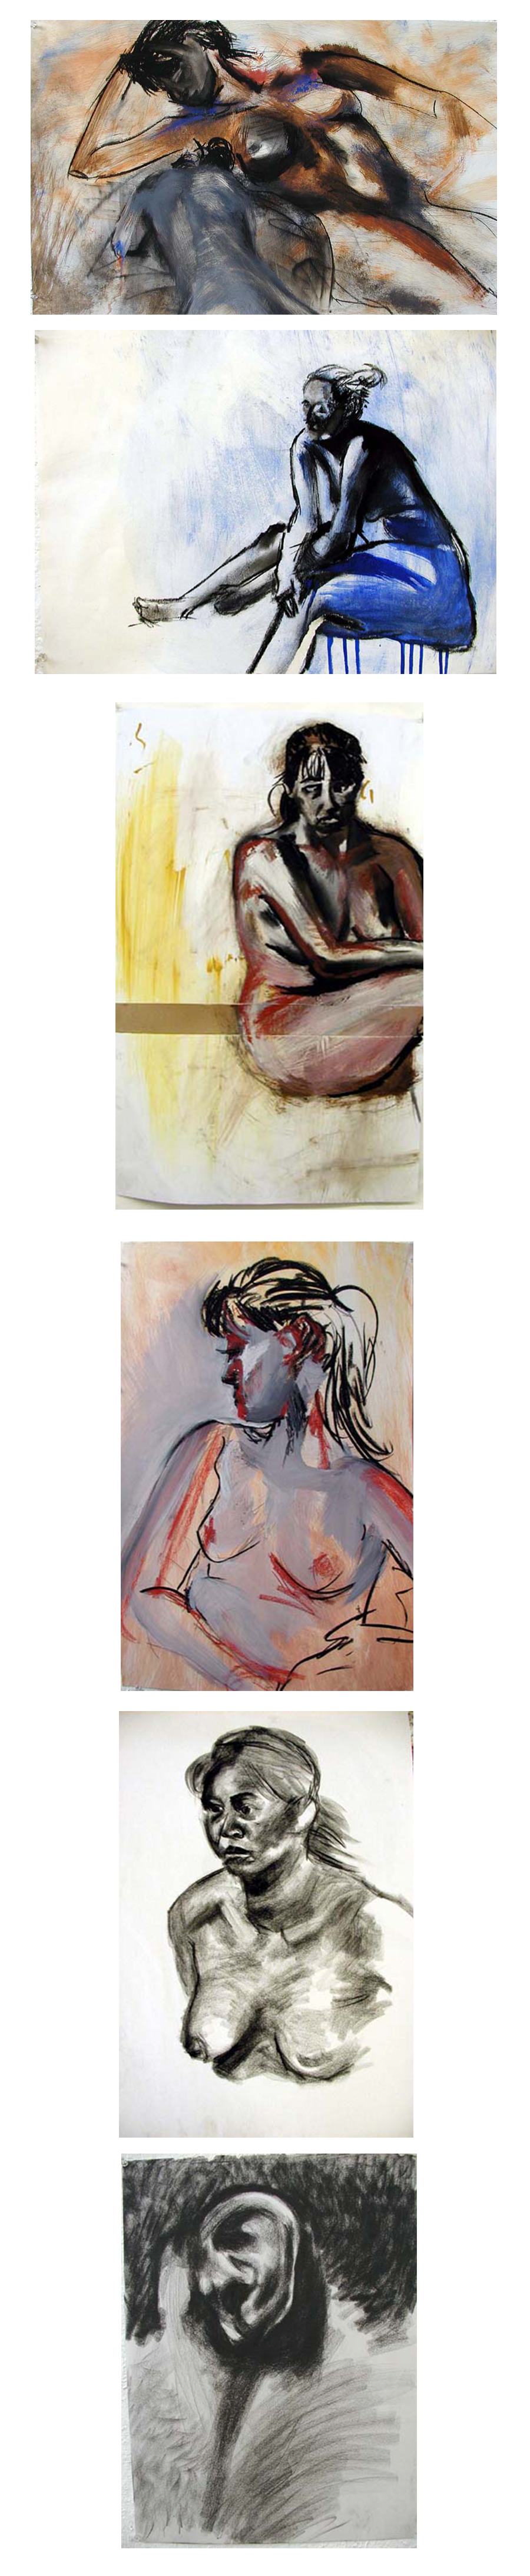 Live model figurative drawings created with charcoal, conte, gesso and graphite pencils on paper.